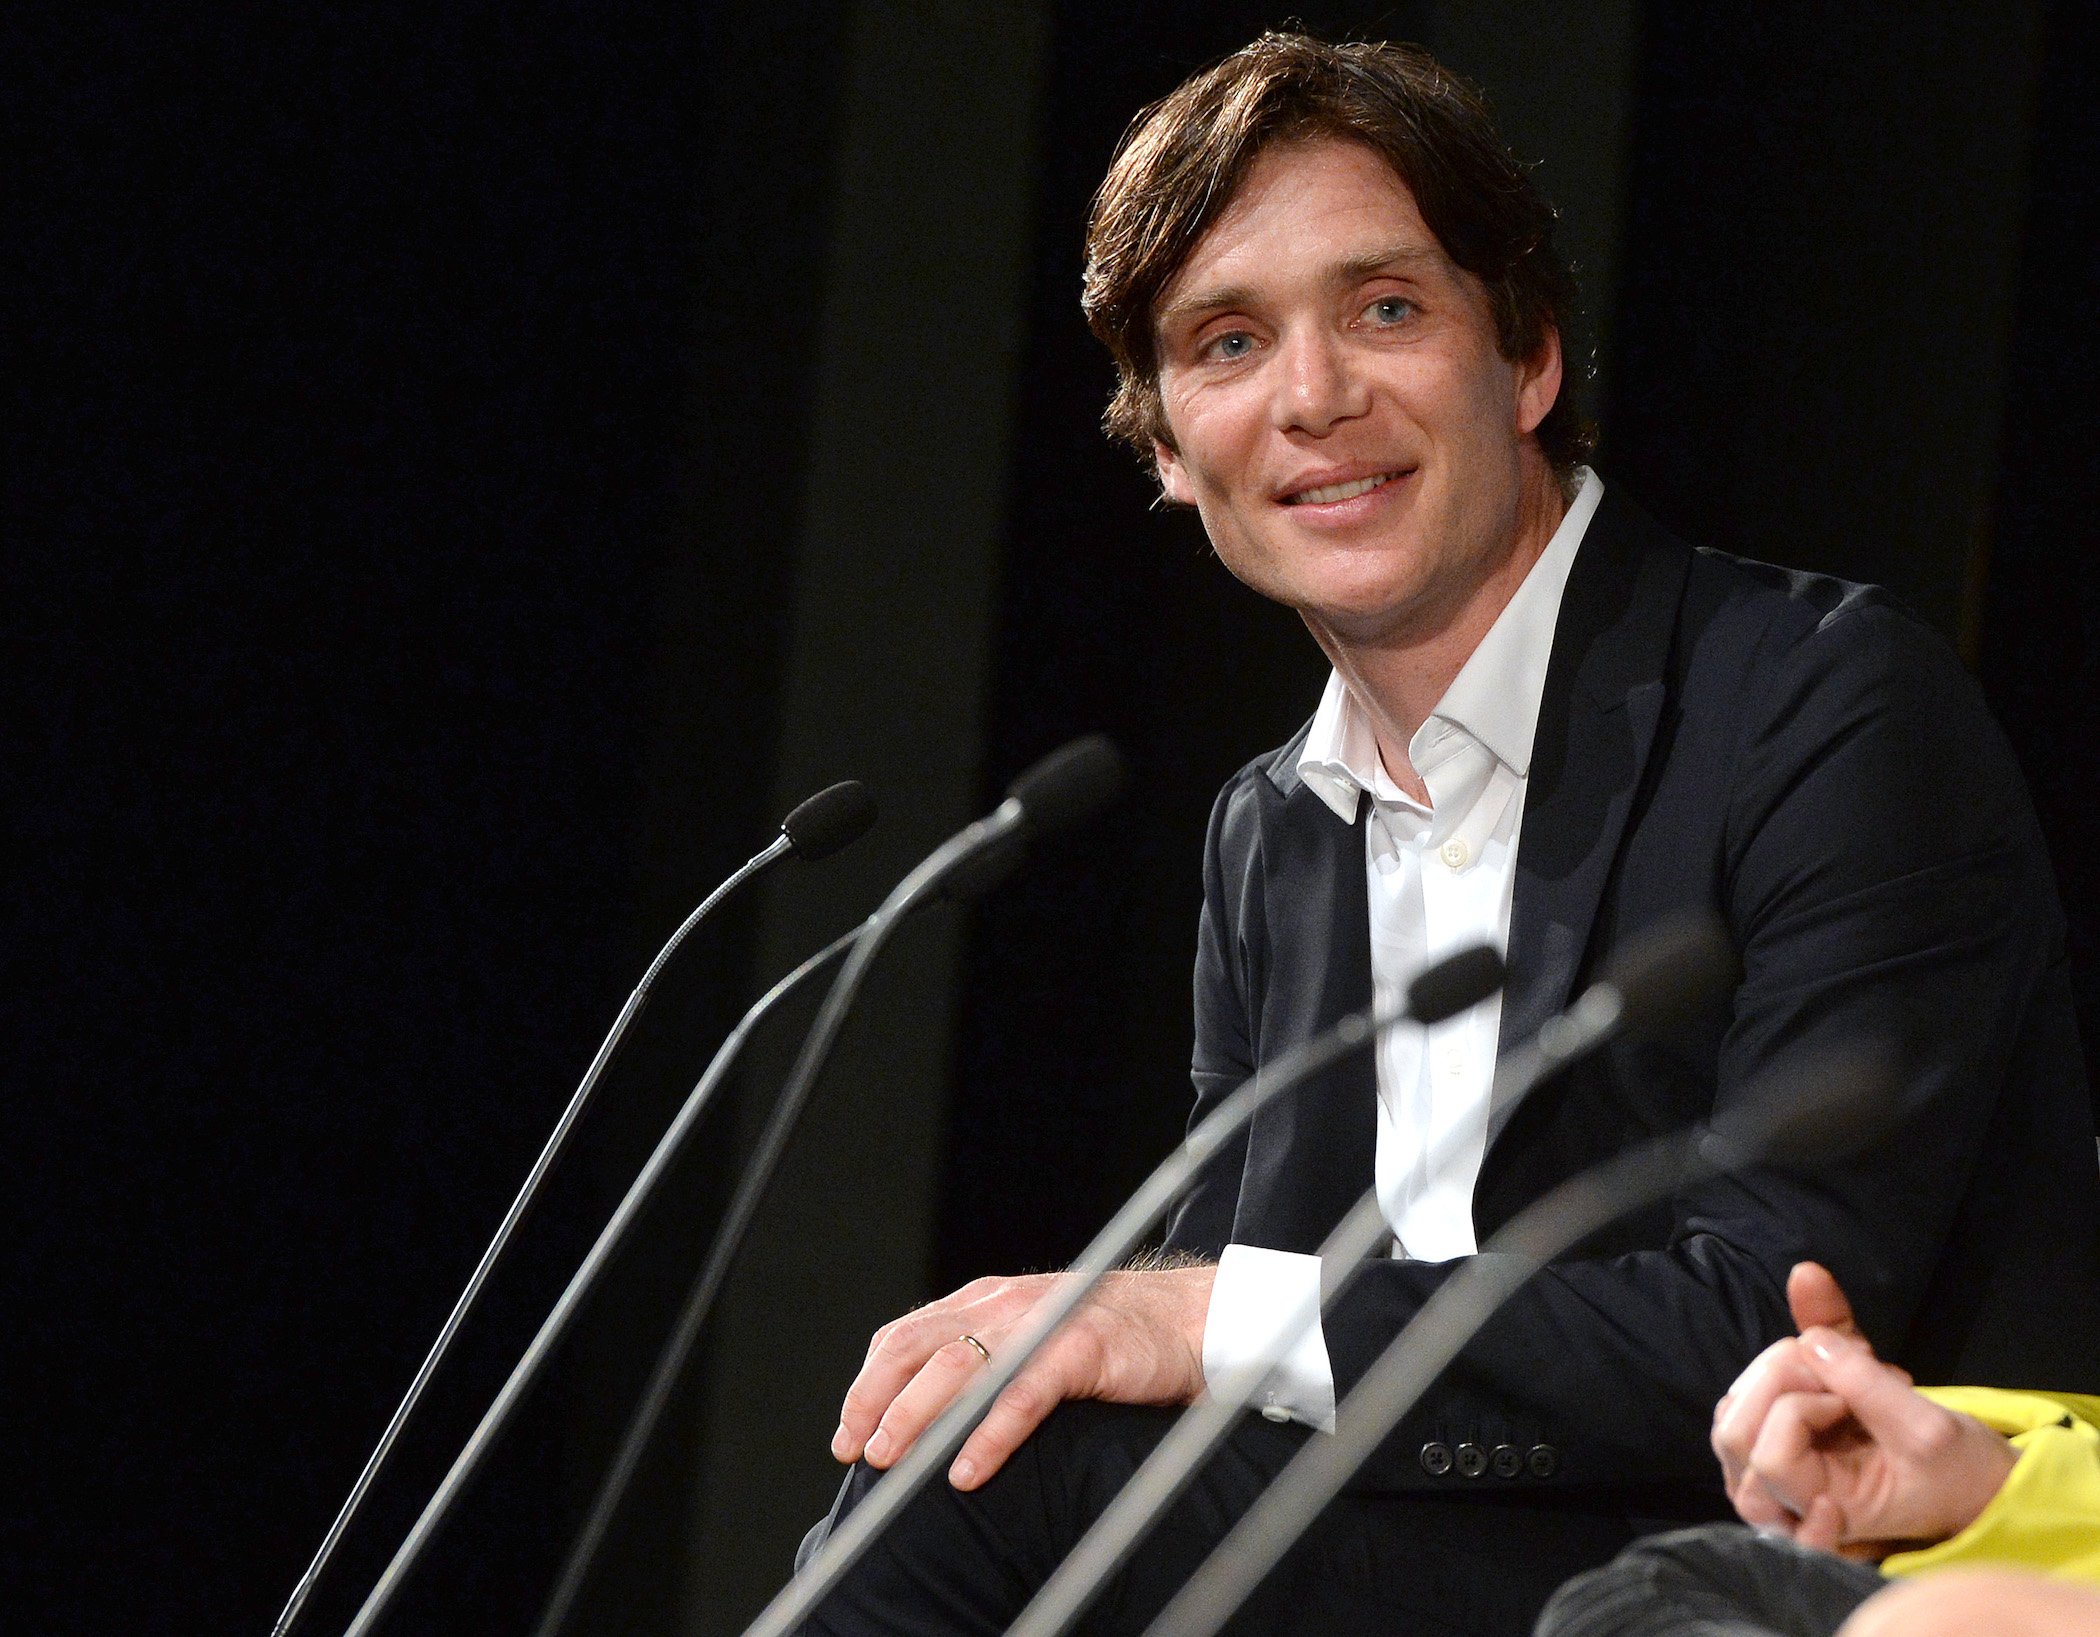 Cillian Murphy from 'Peaky Blinders' smiling and speaking at an event. Cillian Murphy plays Thomas Shelby in 'Peaky Blinders' Season 6